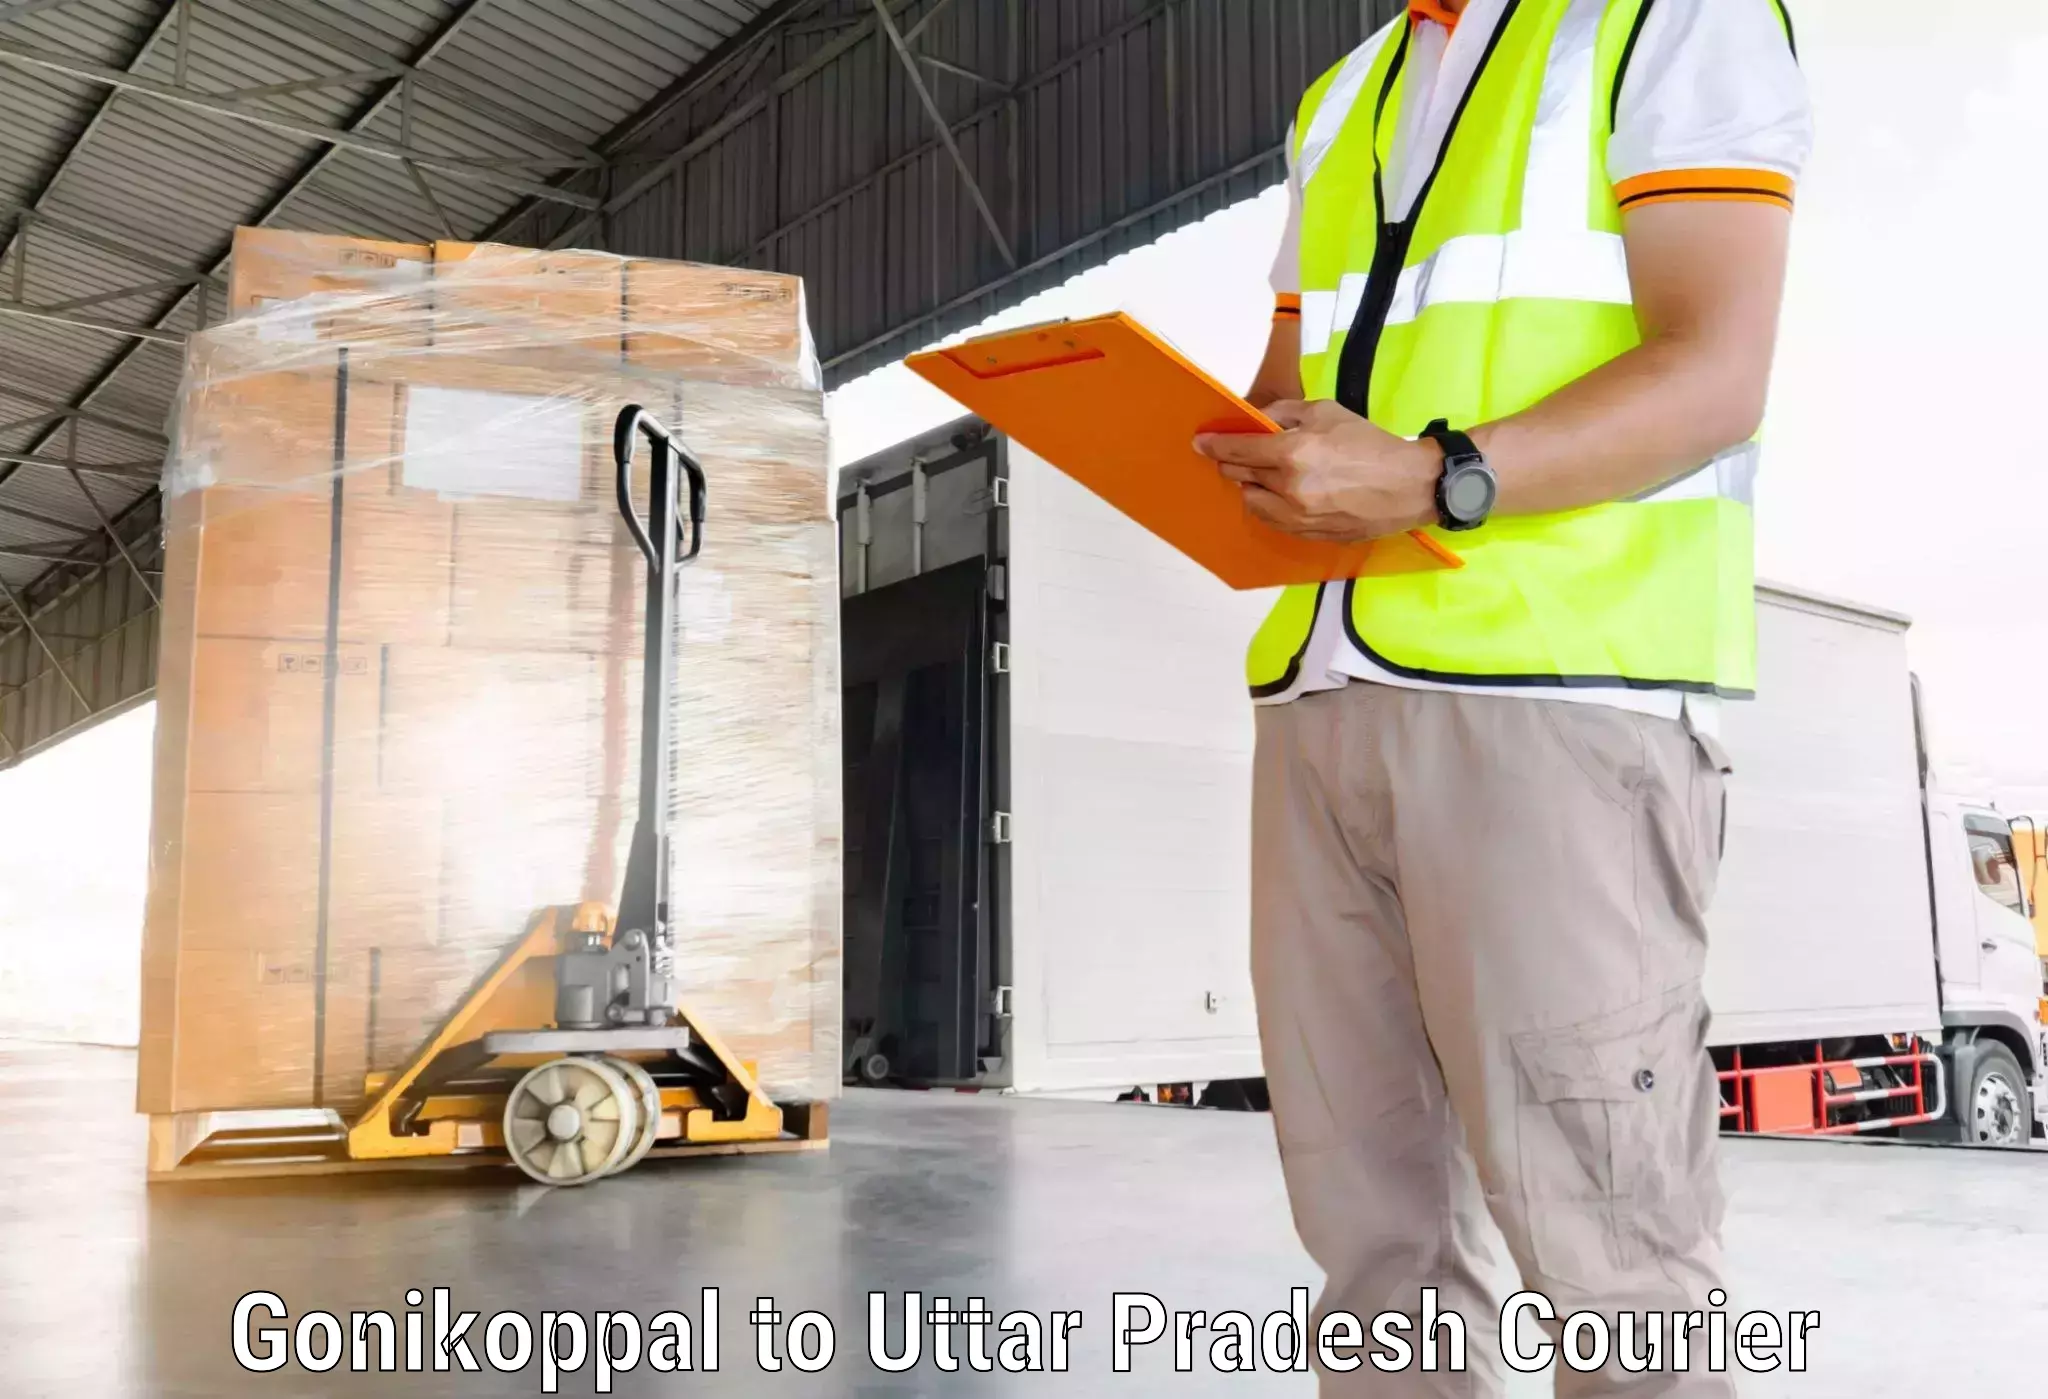 User-friendly courier app Gonikoppal to Chopan